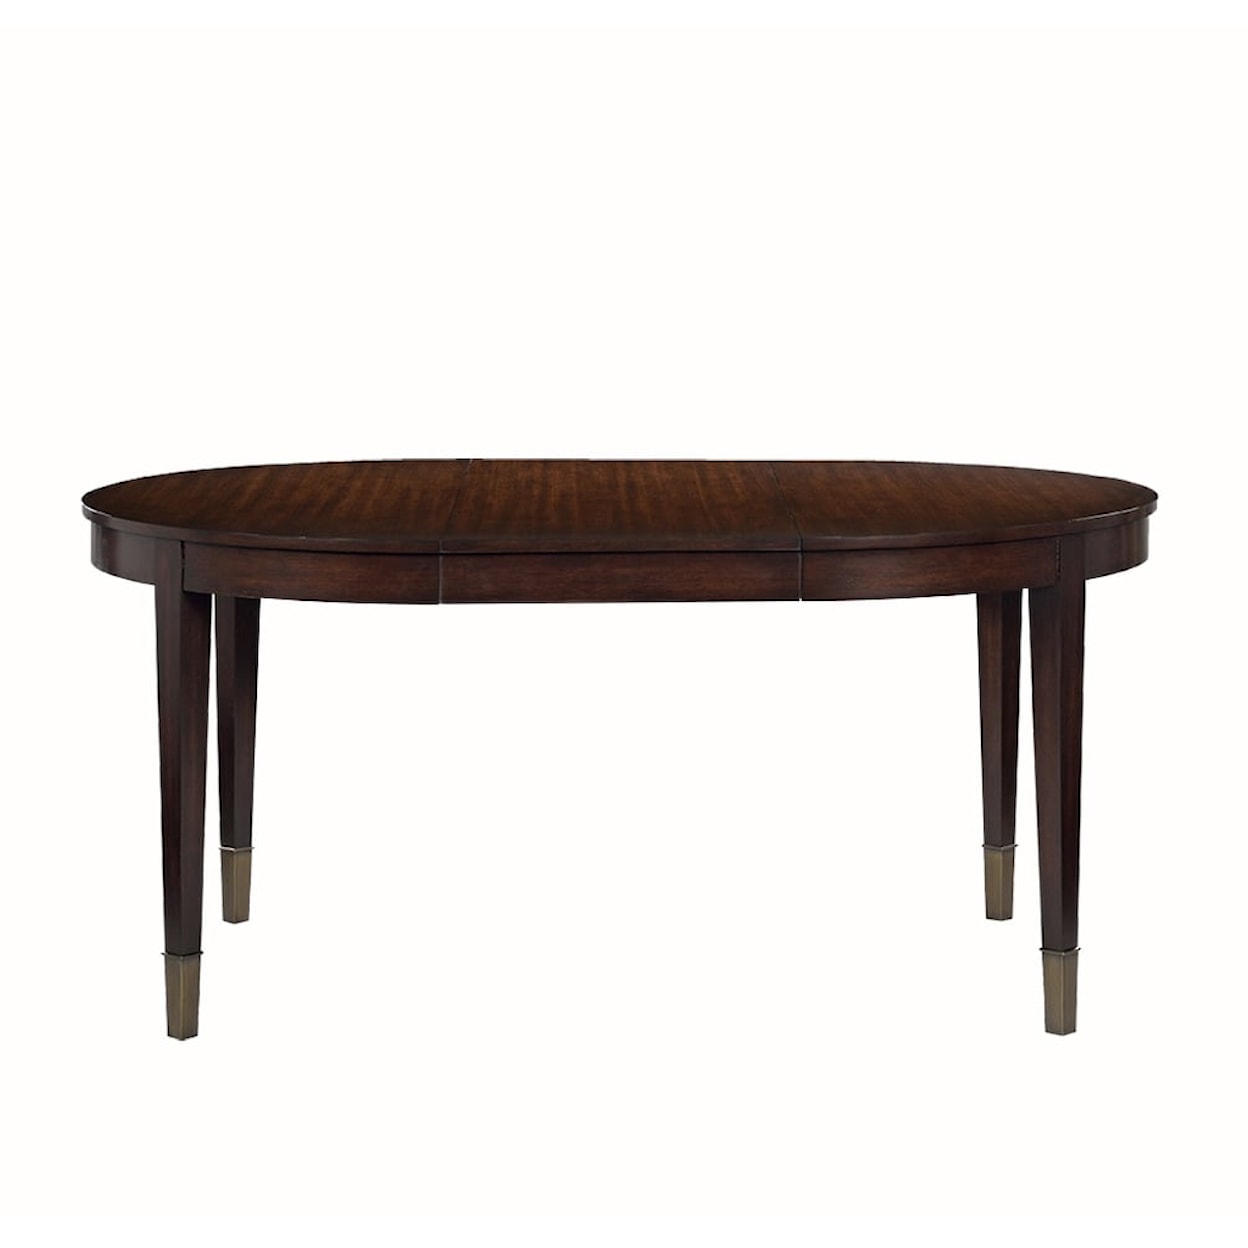 Oliver Home Furnishings Dining Tables ROUND DINING TABLE W/ LEAF- SYRUP